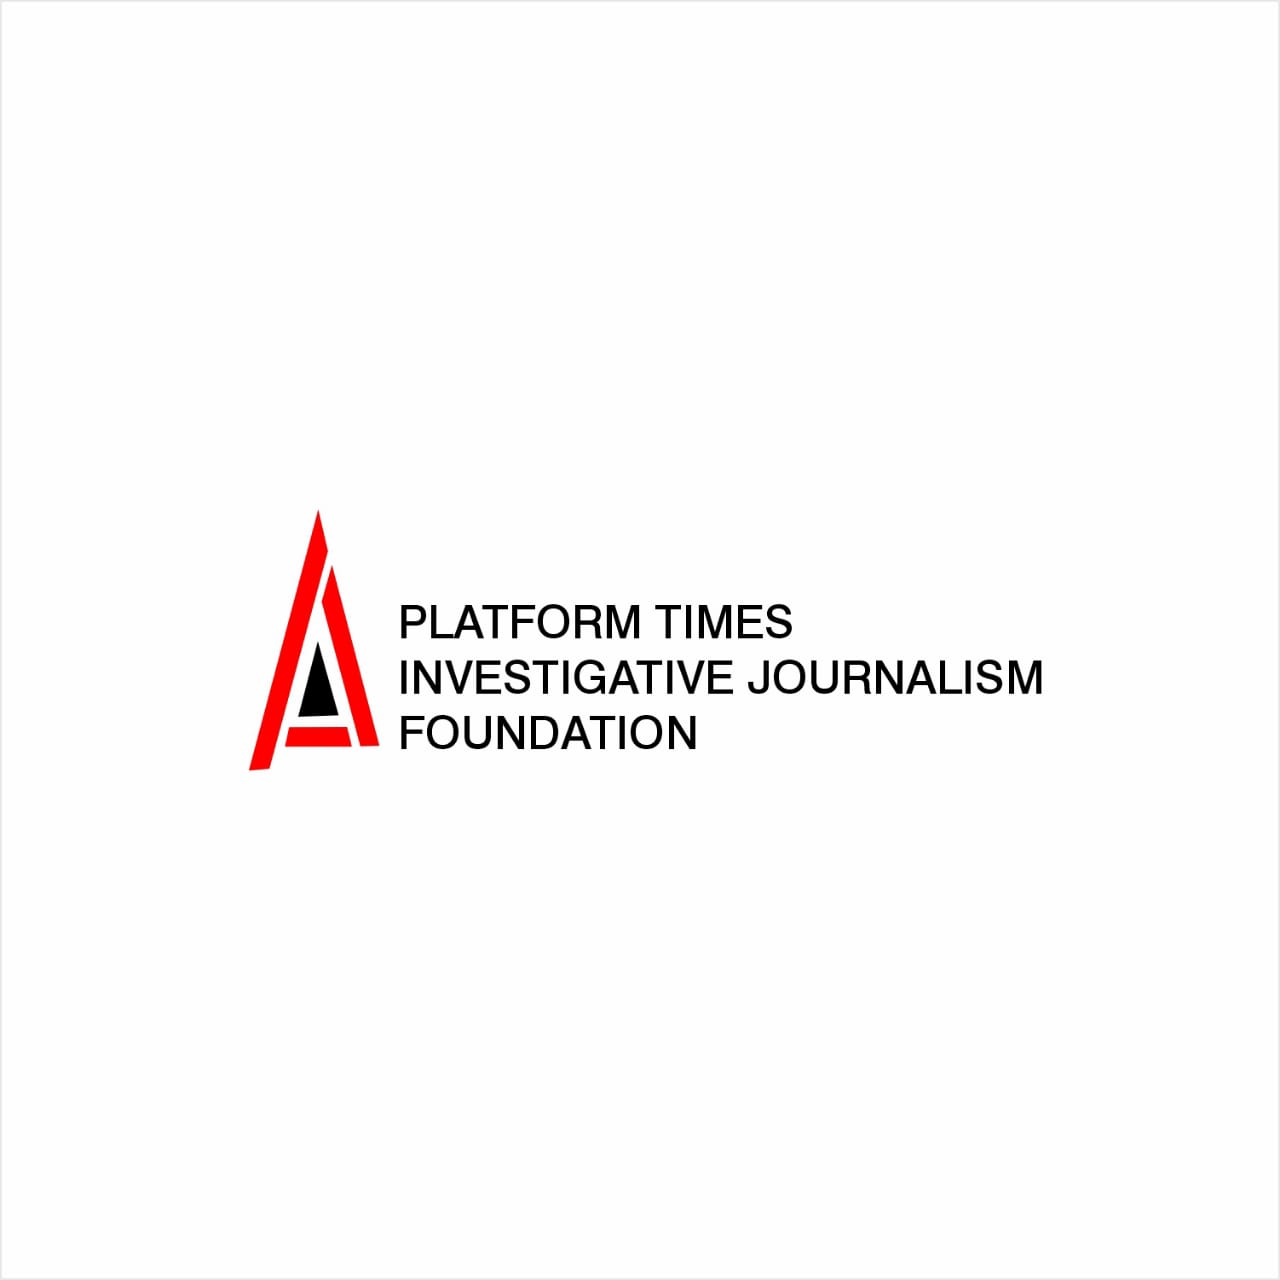 Foundation to train 2,000 journalists on climate, gender reporting